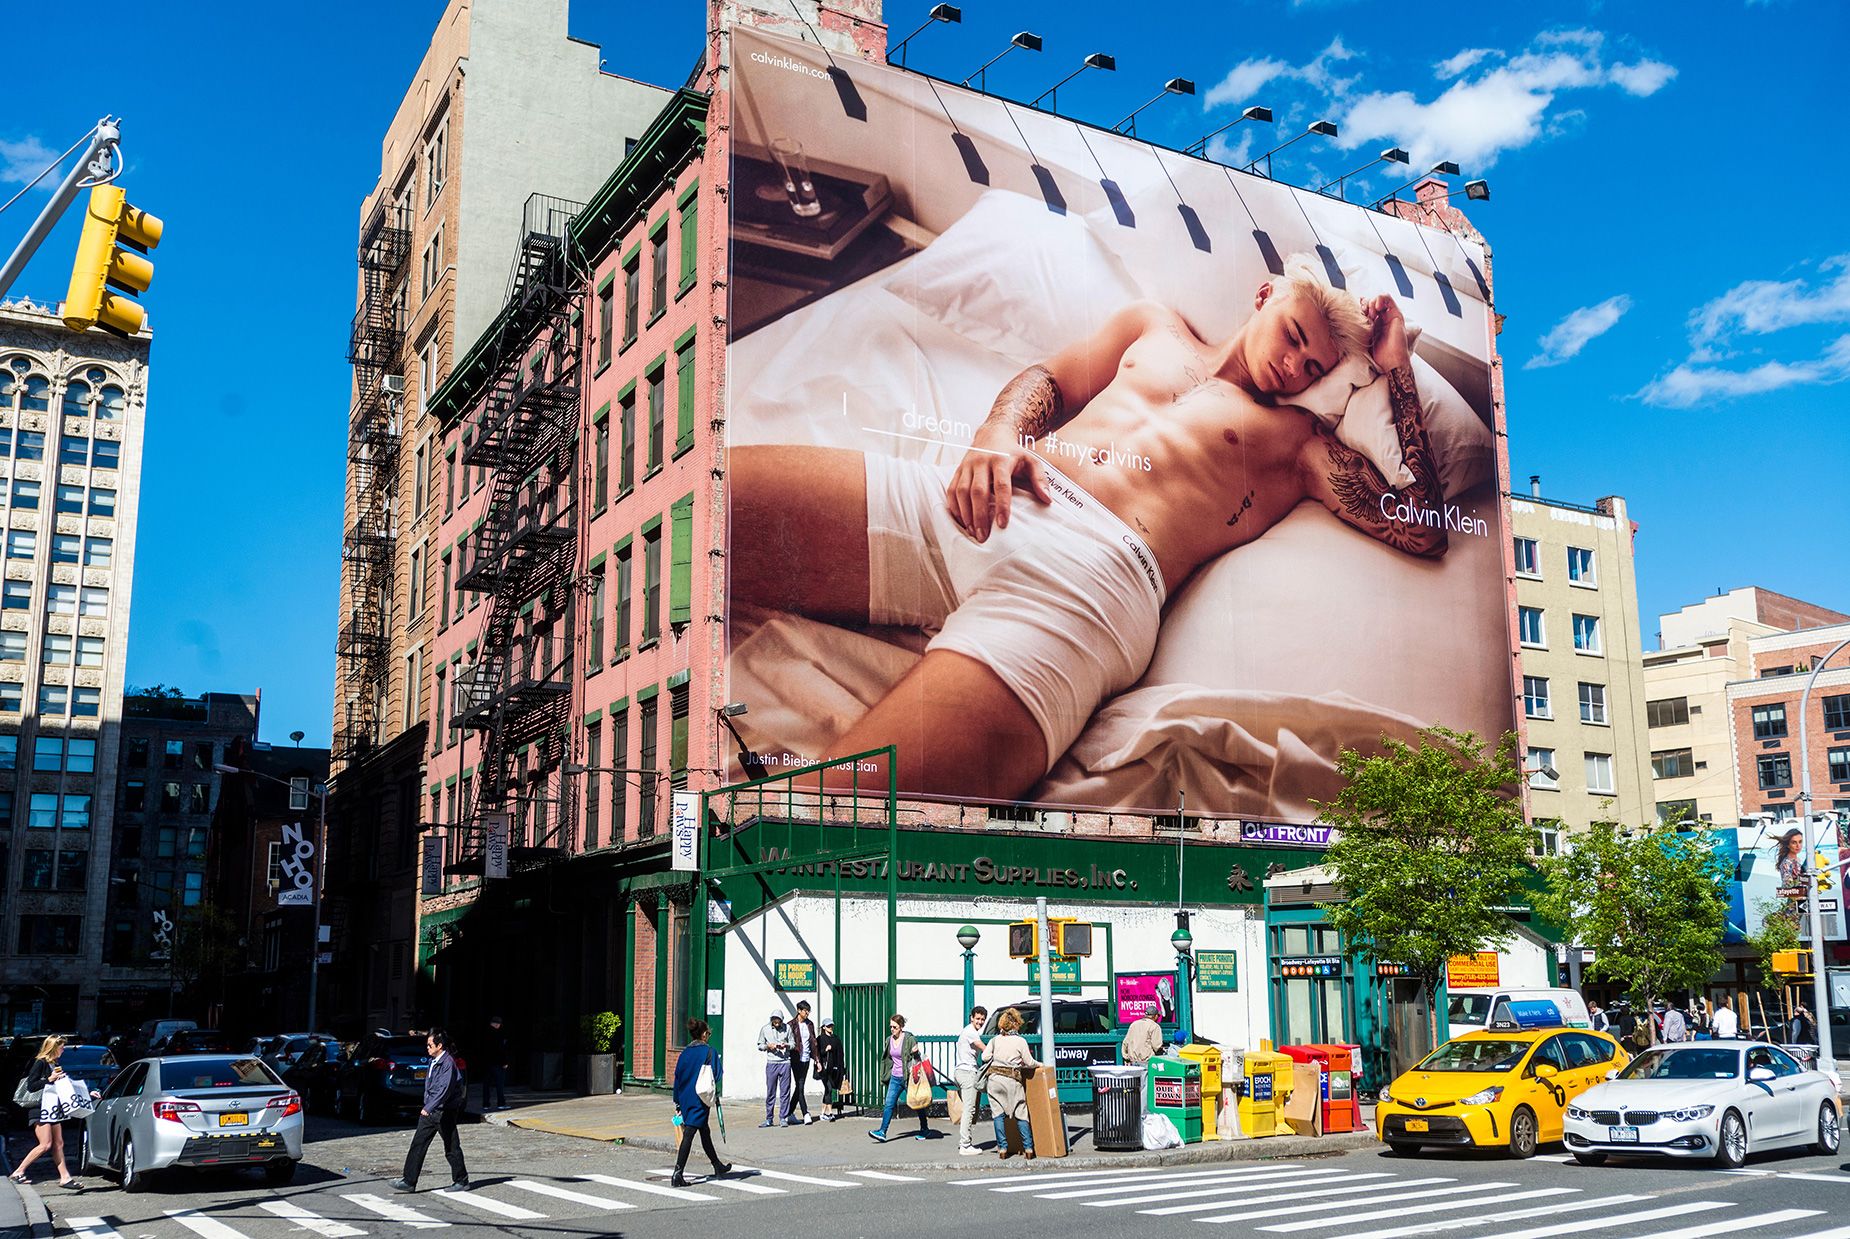 Justin Bieber's Calvin Klein campaign — pictured here in on a billboard in New York's NoHo neighborhood in May 2016 — served as part of an image overhaul for the popstar.